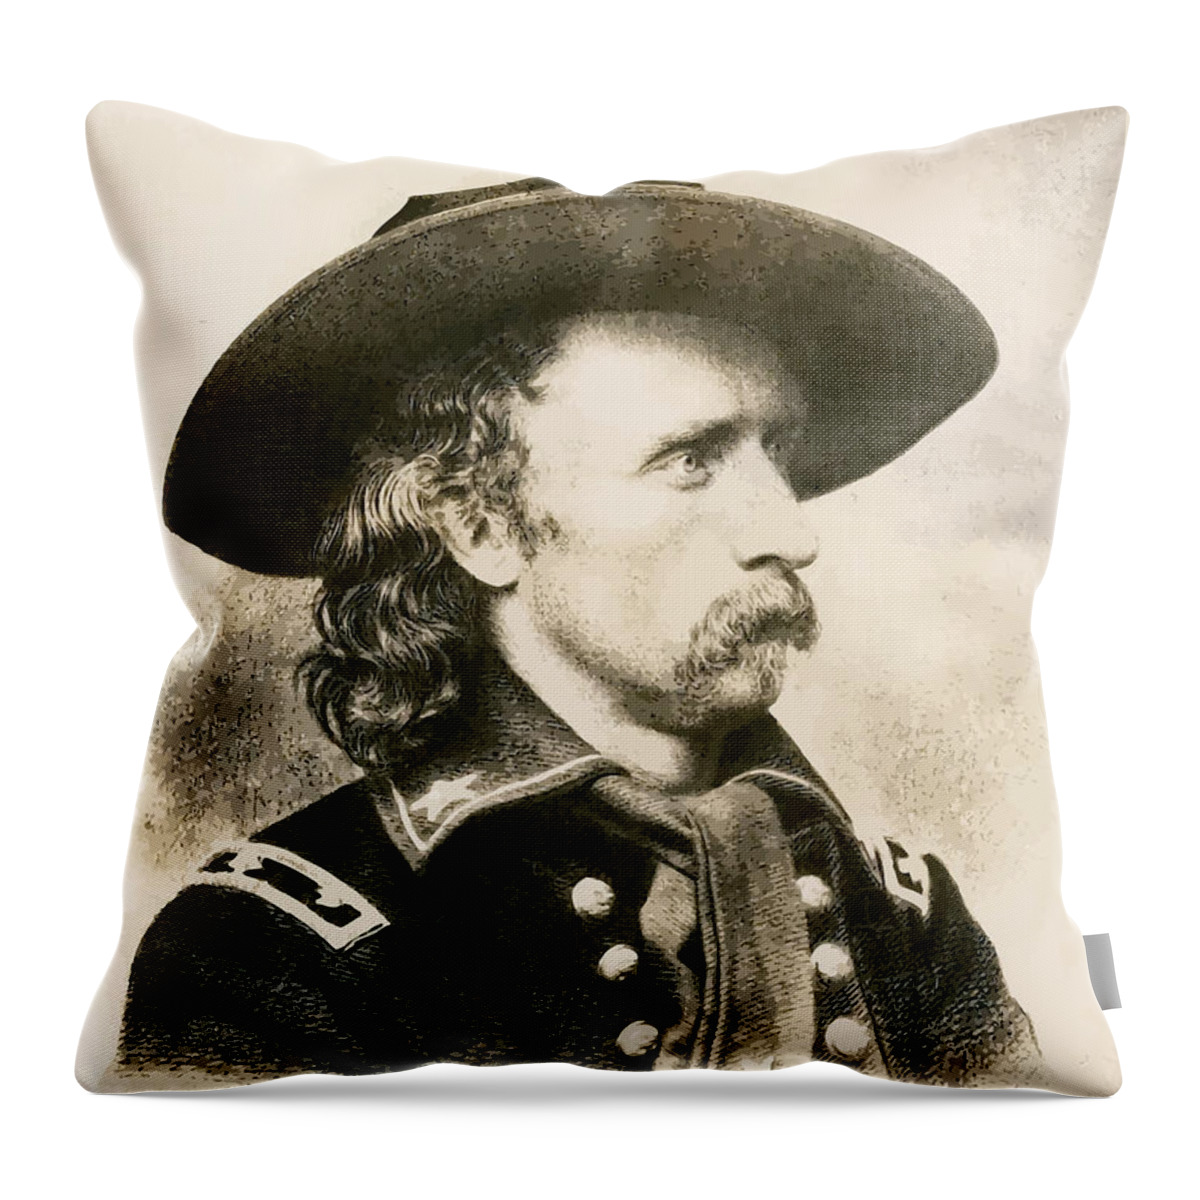 Custer Throw Pillow featuring the painting George Armstrong Custer by War Is Hell Store